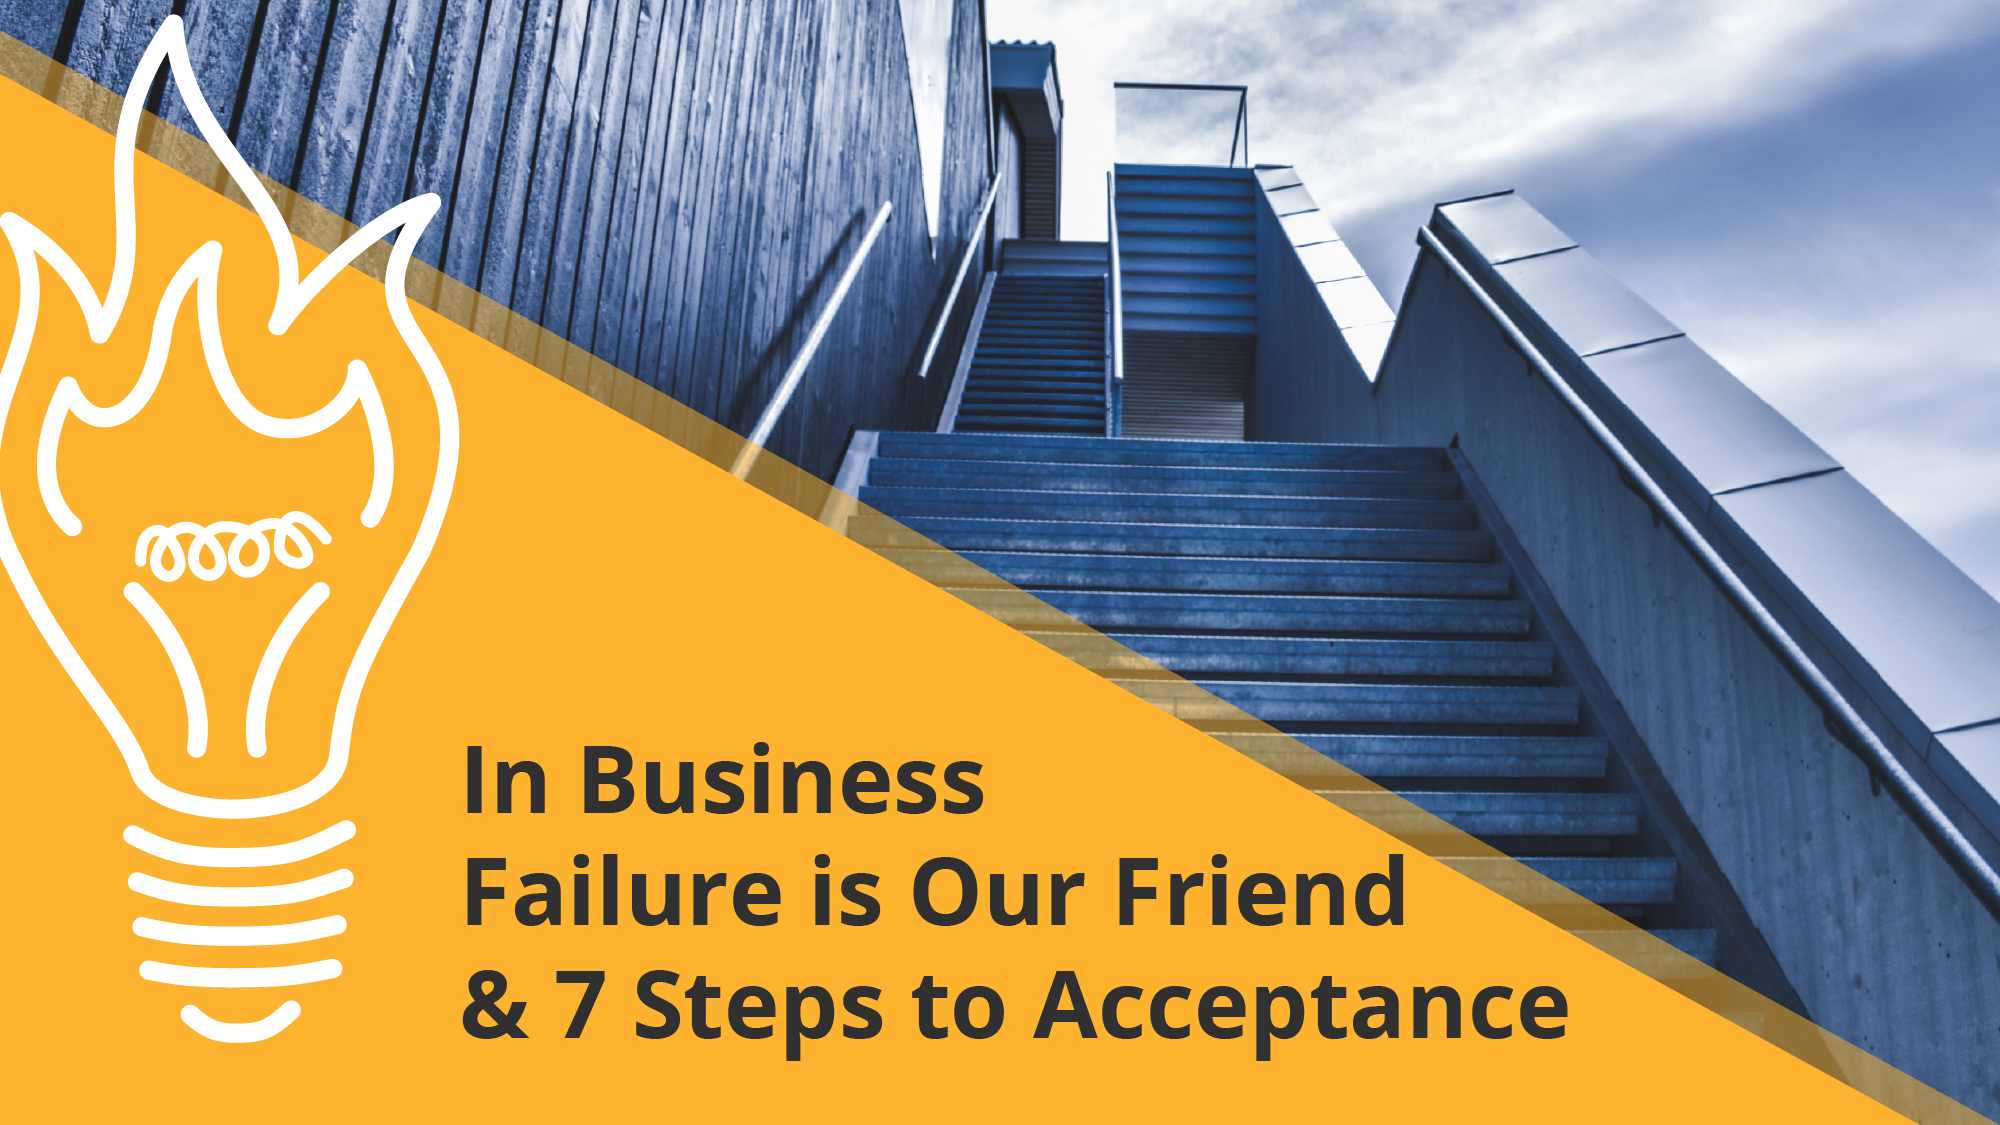 How to accept failure in business